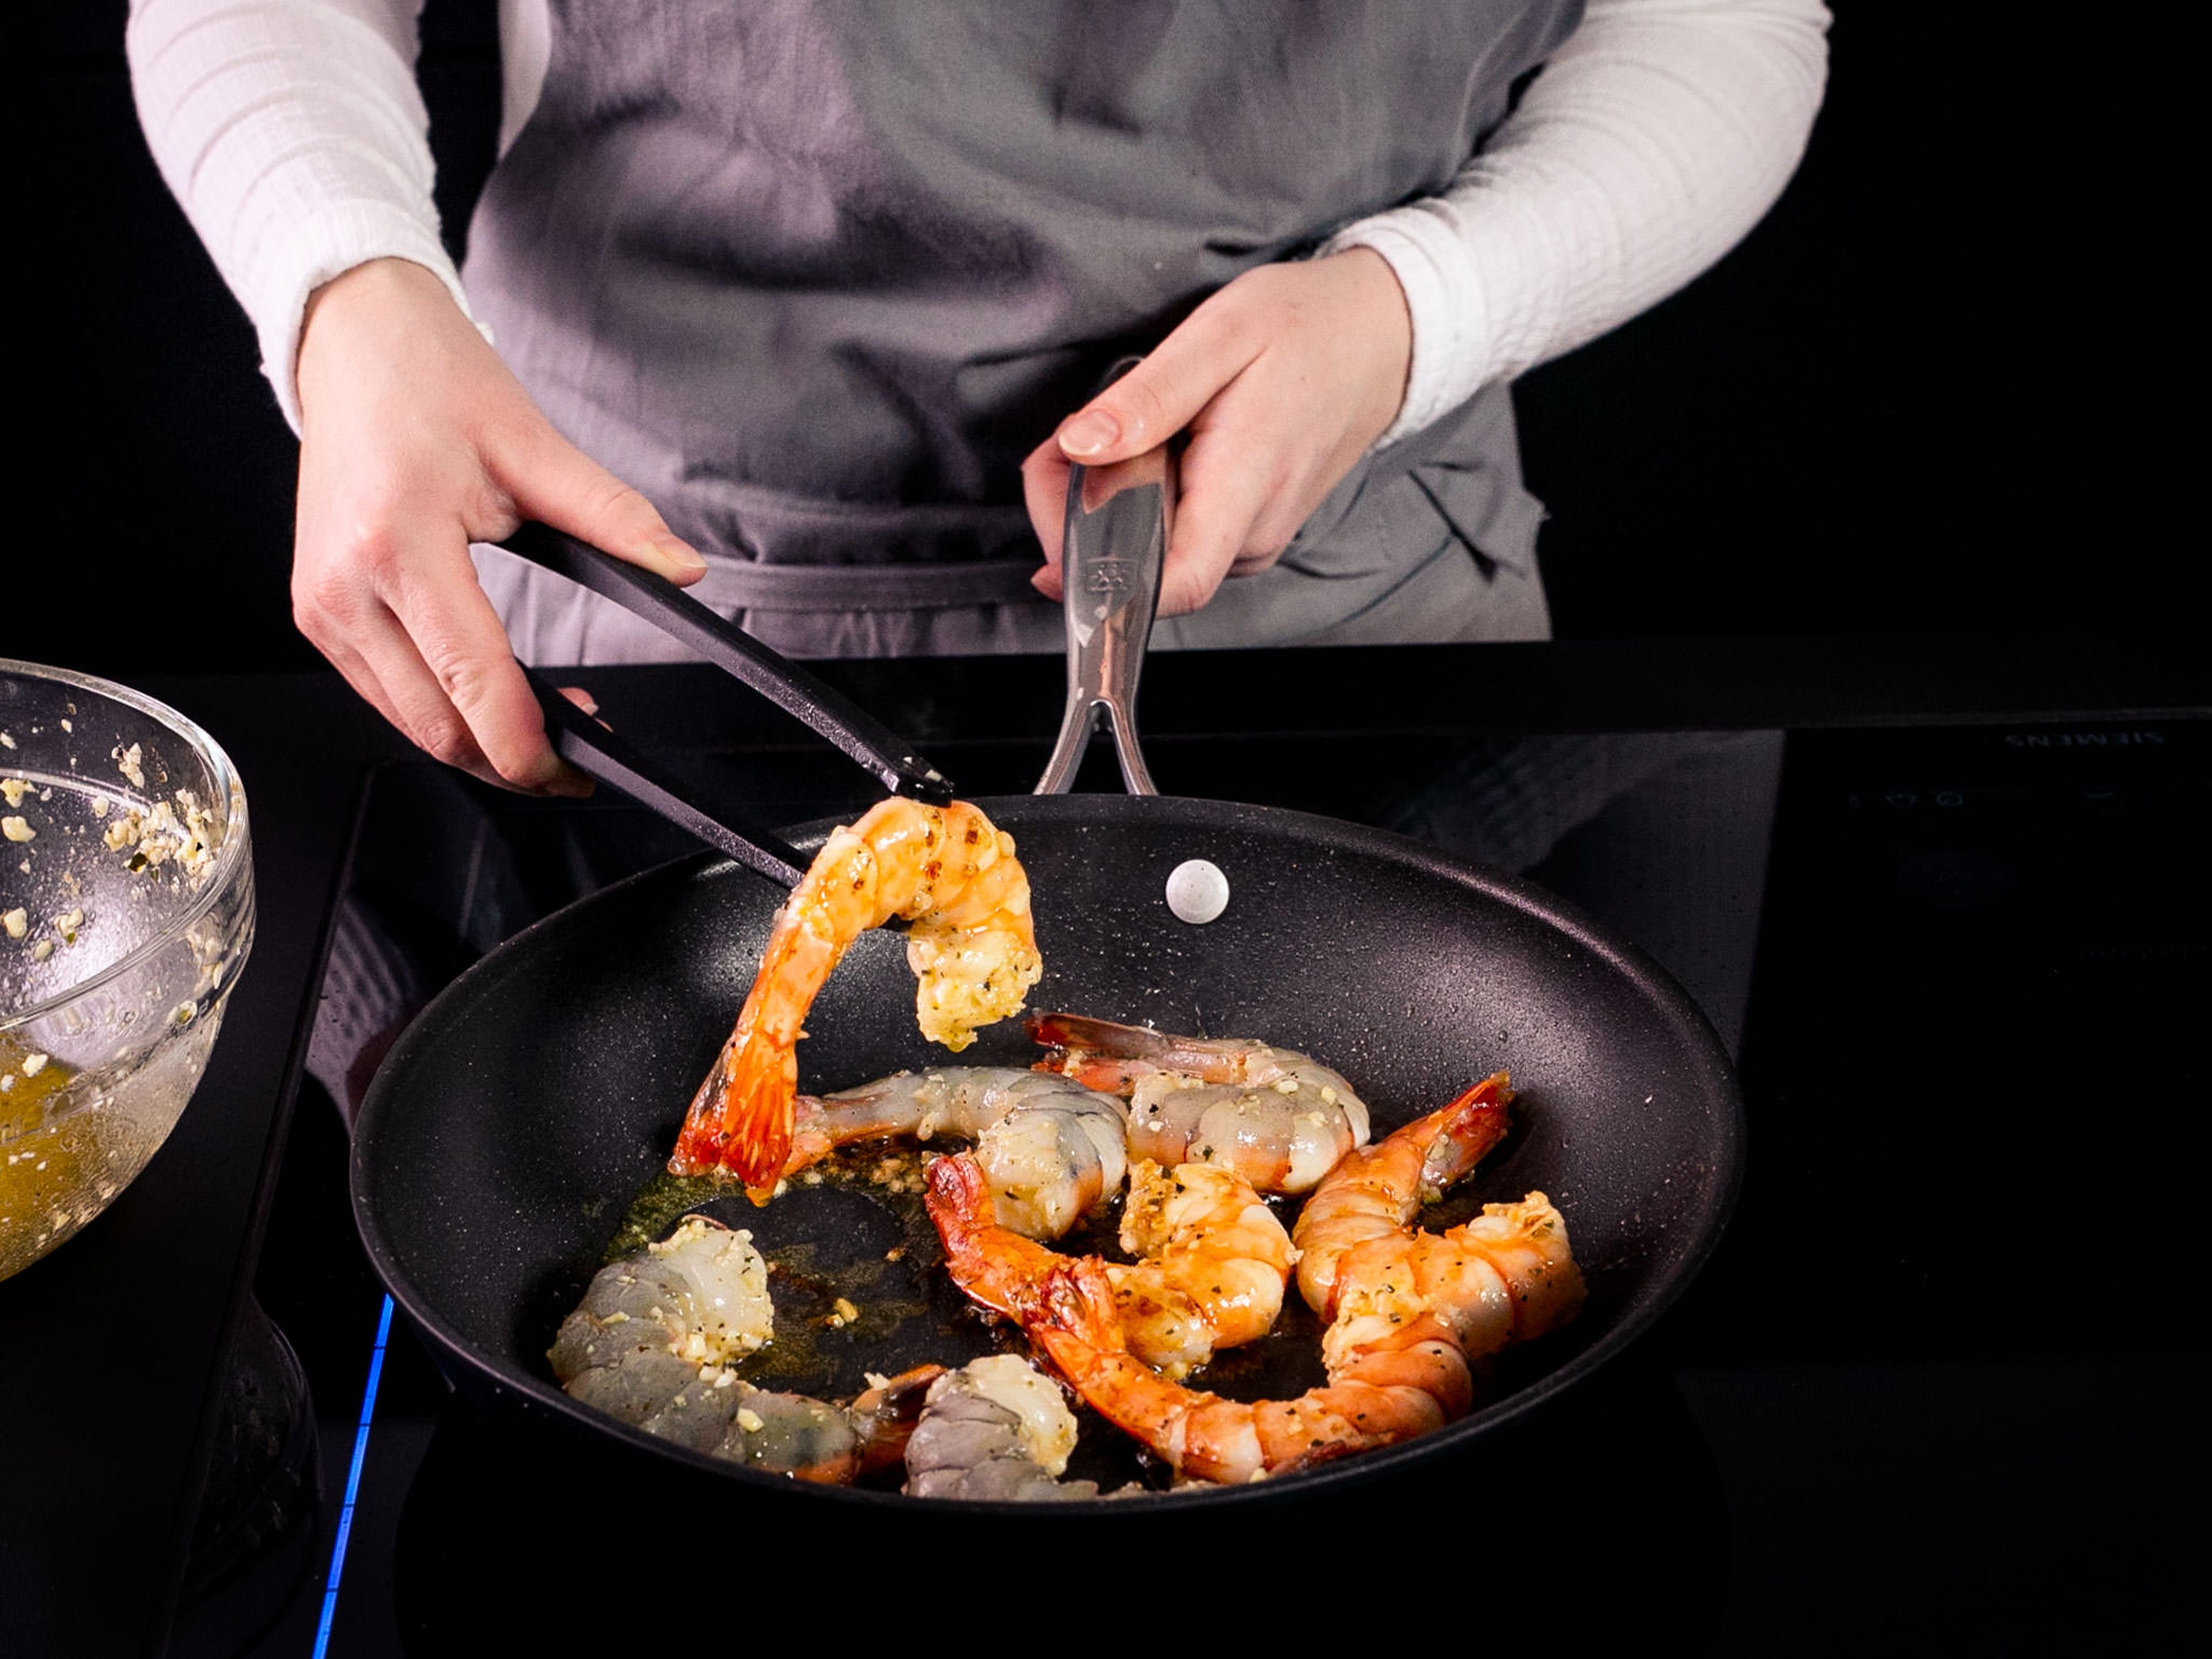 Set a pan over medium-high heat and bring up to temperature. Add a bit of vegetable oil, then fry shrimp until cooked through, approx. 3 min. per side. Once done, add the remaining mojo and toss together.